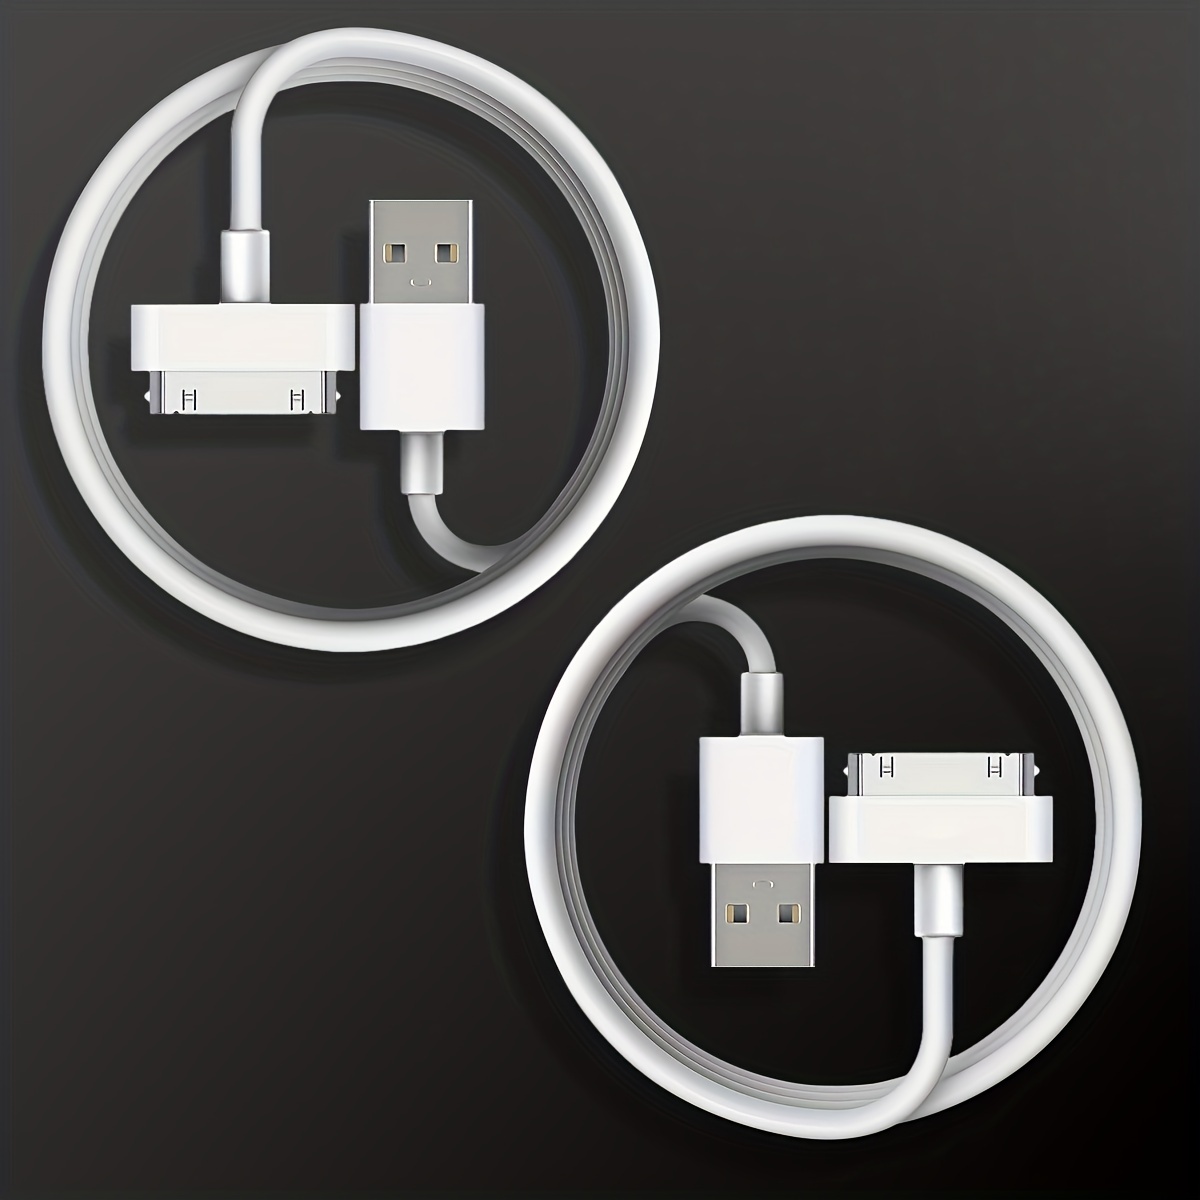 Charge + Sync Cable USB-A To 30-Pin Connector 